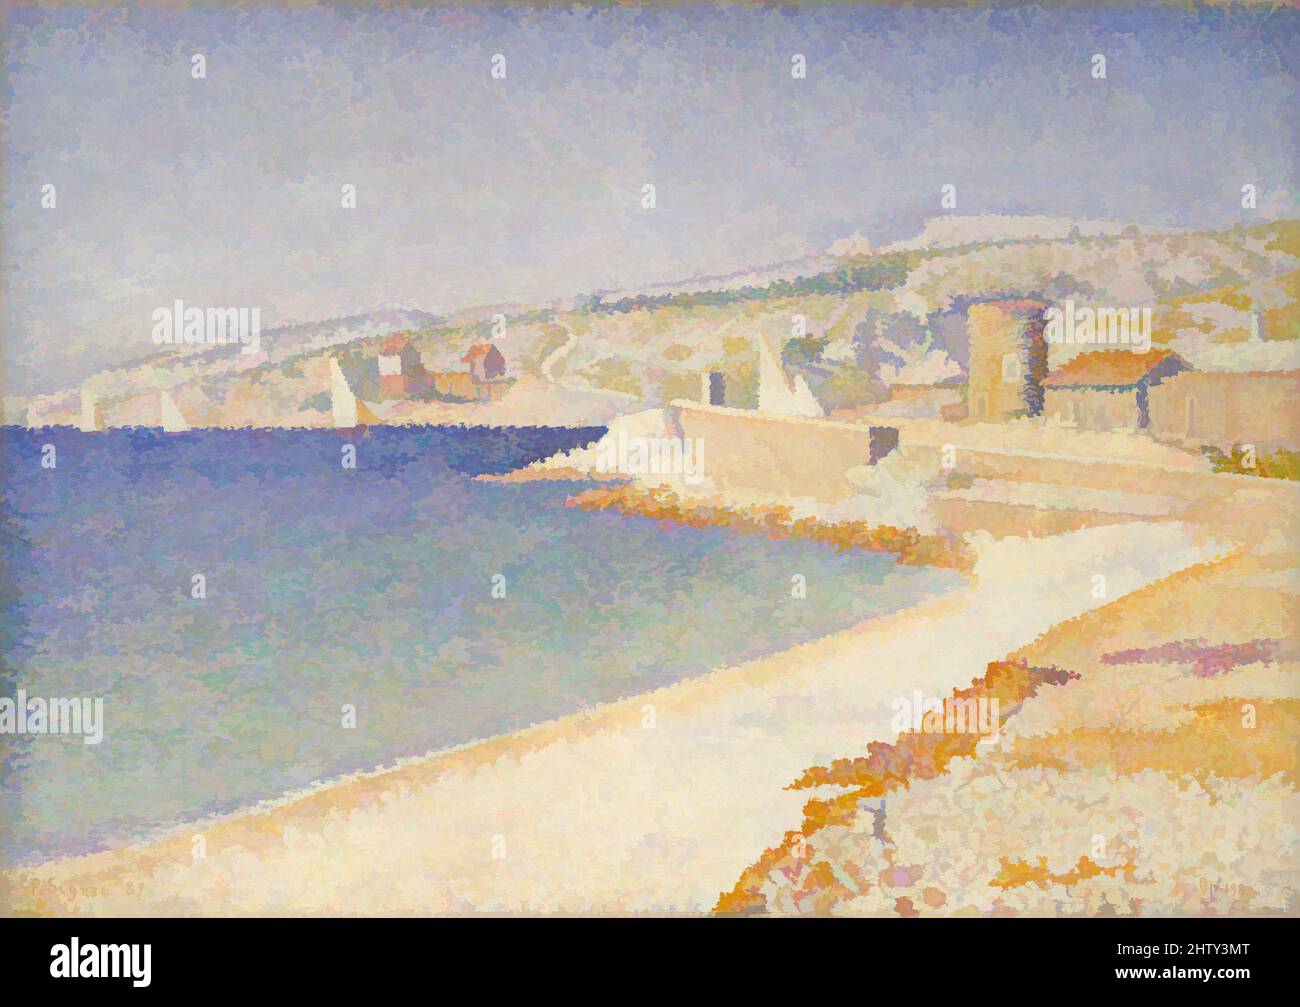 Art inspired by The Jetty at Cassis, Opus 198, 1889, Oil on canvas, 18 1/4 x 25 5/8 in. (46.4 x 65.1 cm), Paintings, Paul Signac (French, Paris 1863–1935 Paris), Between 1887 and 1891, Signac spent the warmer months pursuing his two passions, marine painting and boating, on excursions, Classic works modernized by Artotop with a splash of modernity. Shapes, color and value, eye-catching visual impact on art. Emotions through freedom of artworks in a contemporary way. A timeless message pursuing a wildly creative new direction. Artists turning to the digital medium and creating the Artotop NFT Stock Photo